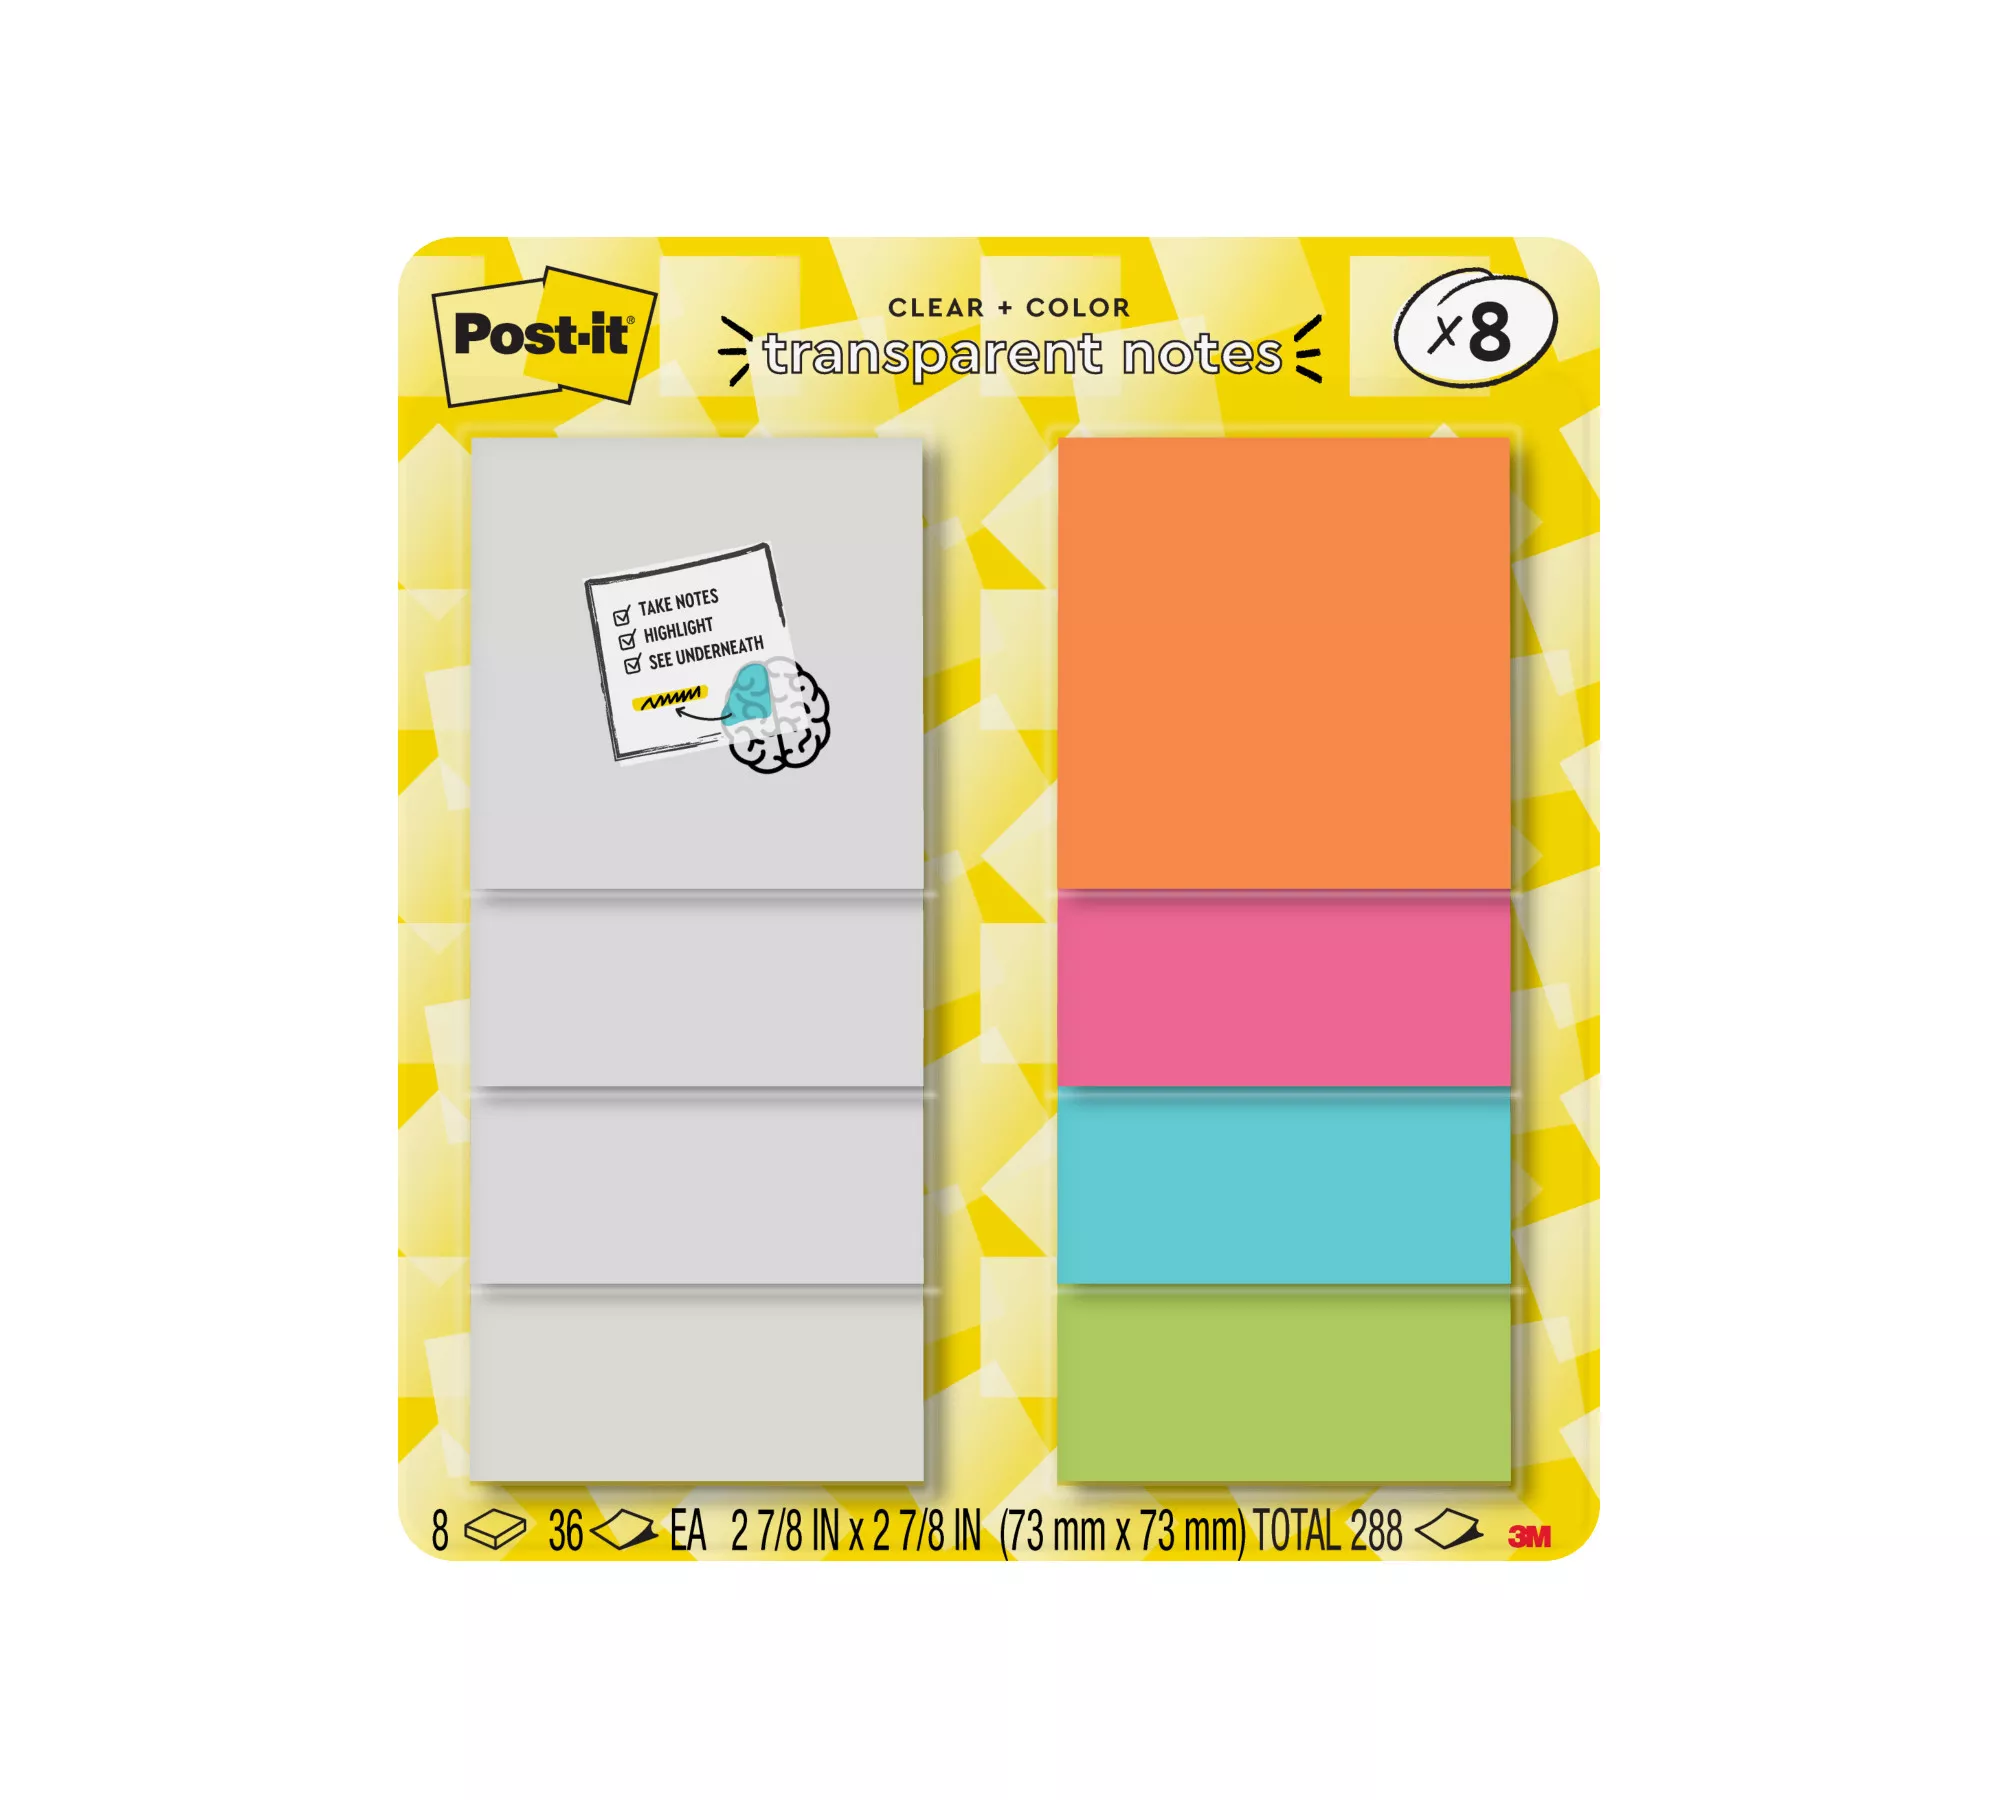 Post-it® Transparent Notes 600-8PK-CLUB, 2-7/8 in x 2-7/8 in (73 mm x 73 mm)